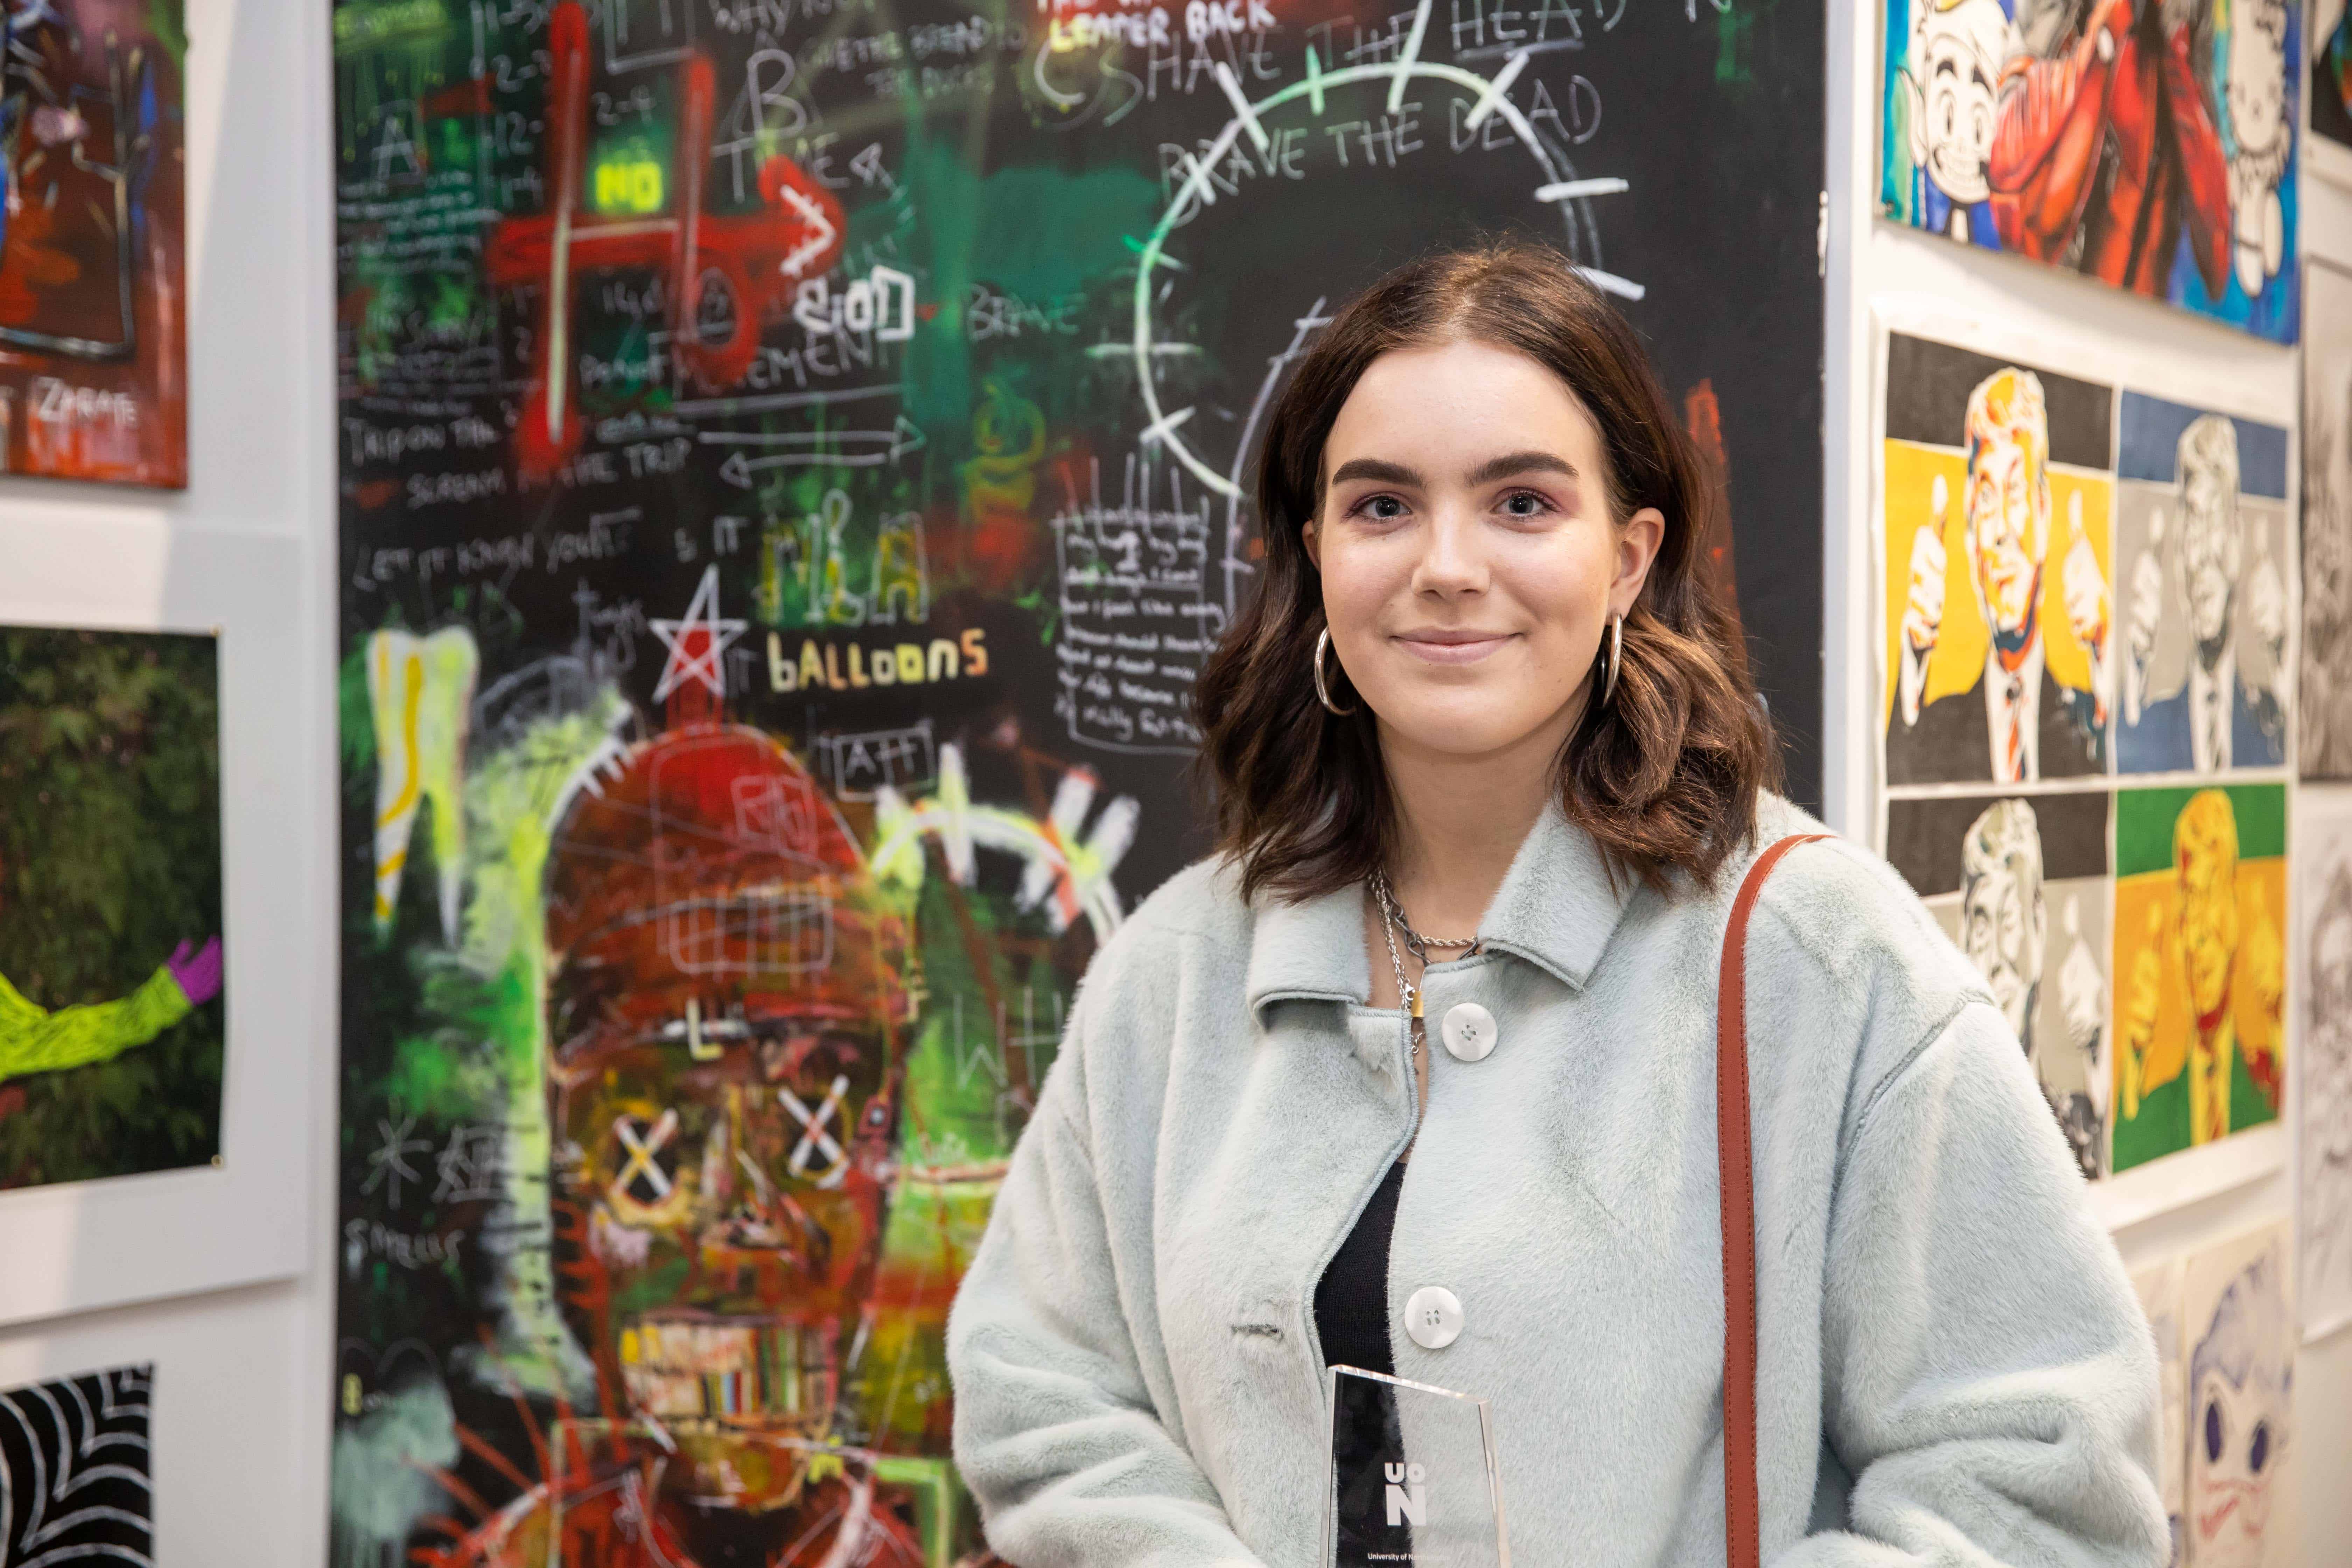 Mia Woods with her winning artwork 'Hell Just Called'.